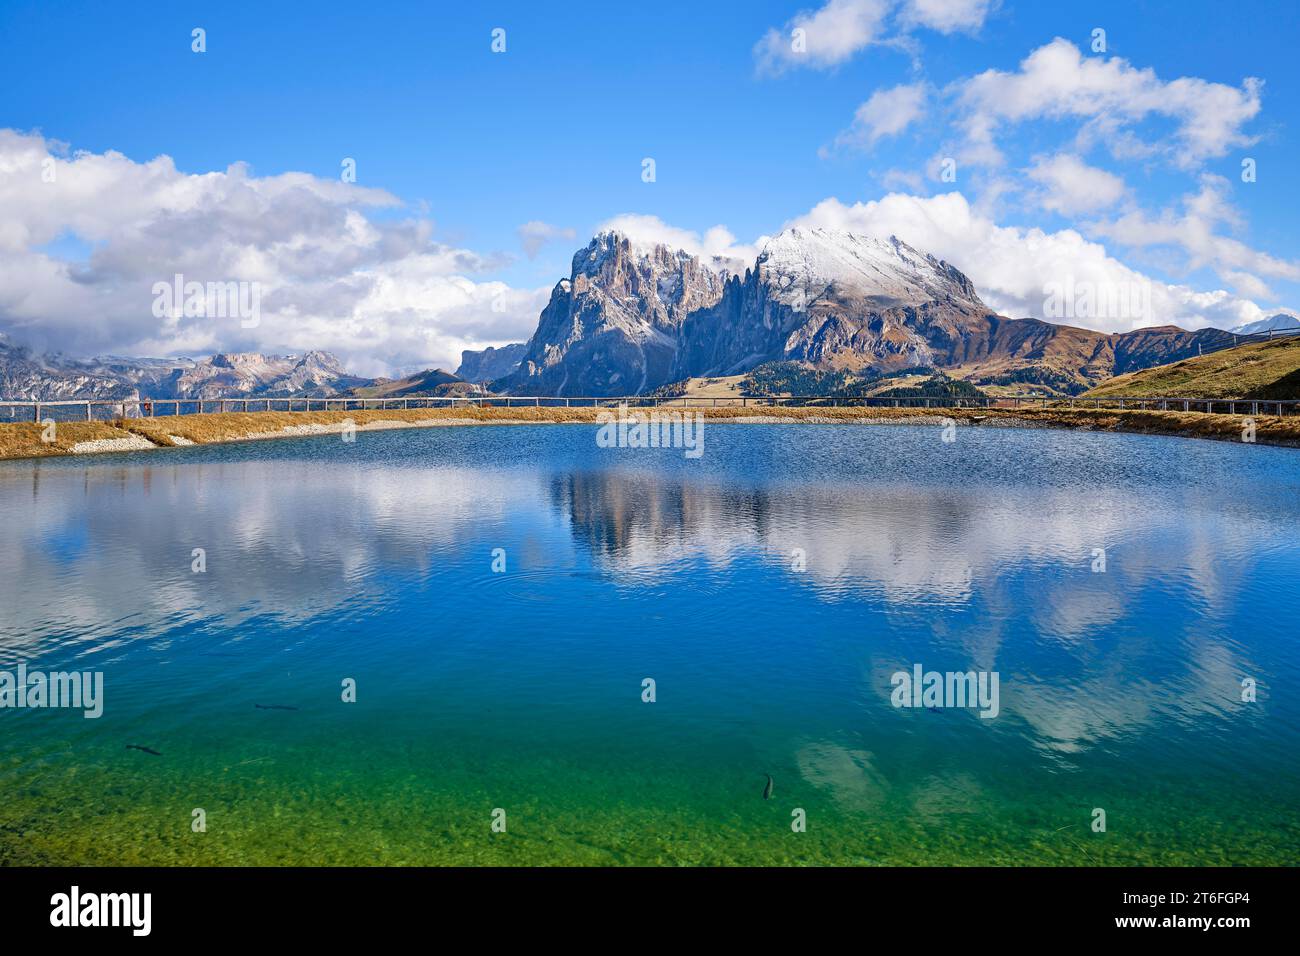 Snow-covered Plattkofel and Langkofel, lake with fish, reflection, Dolomites, Seiser Alm, snow, clouds and blue sky, Kastelruth, South Tyrol Stock Photo